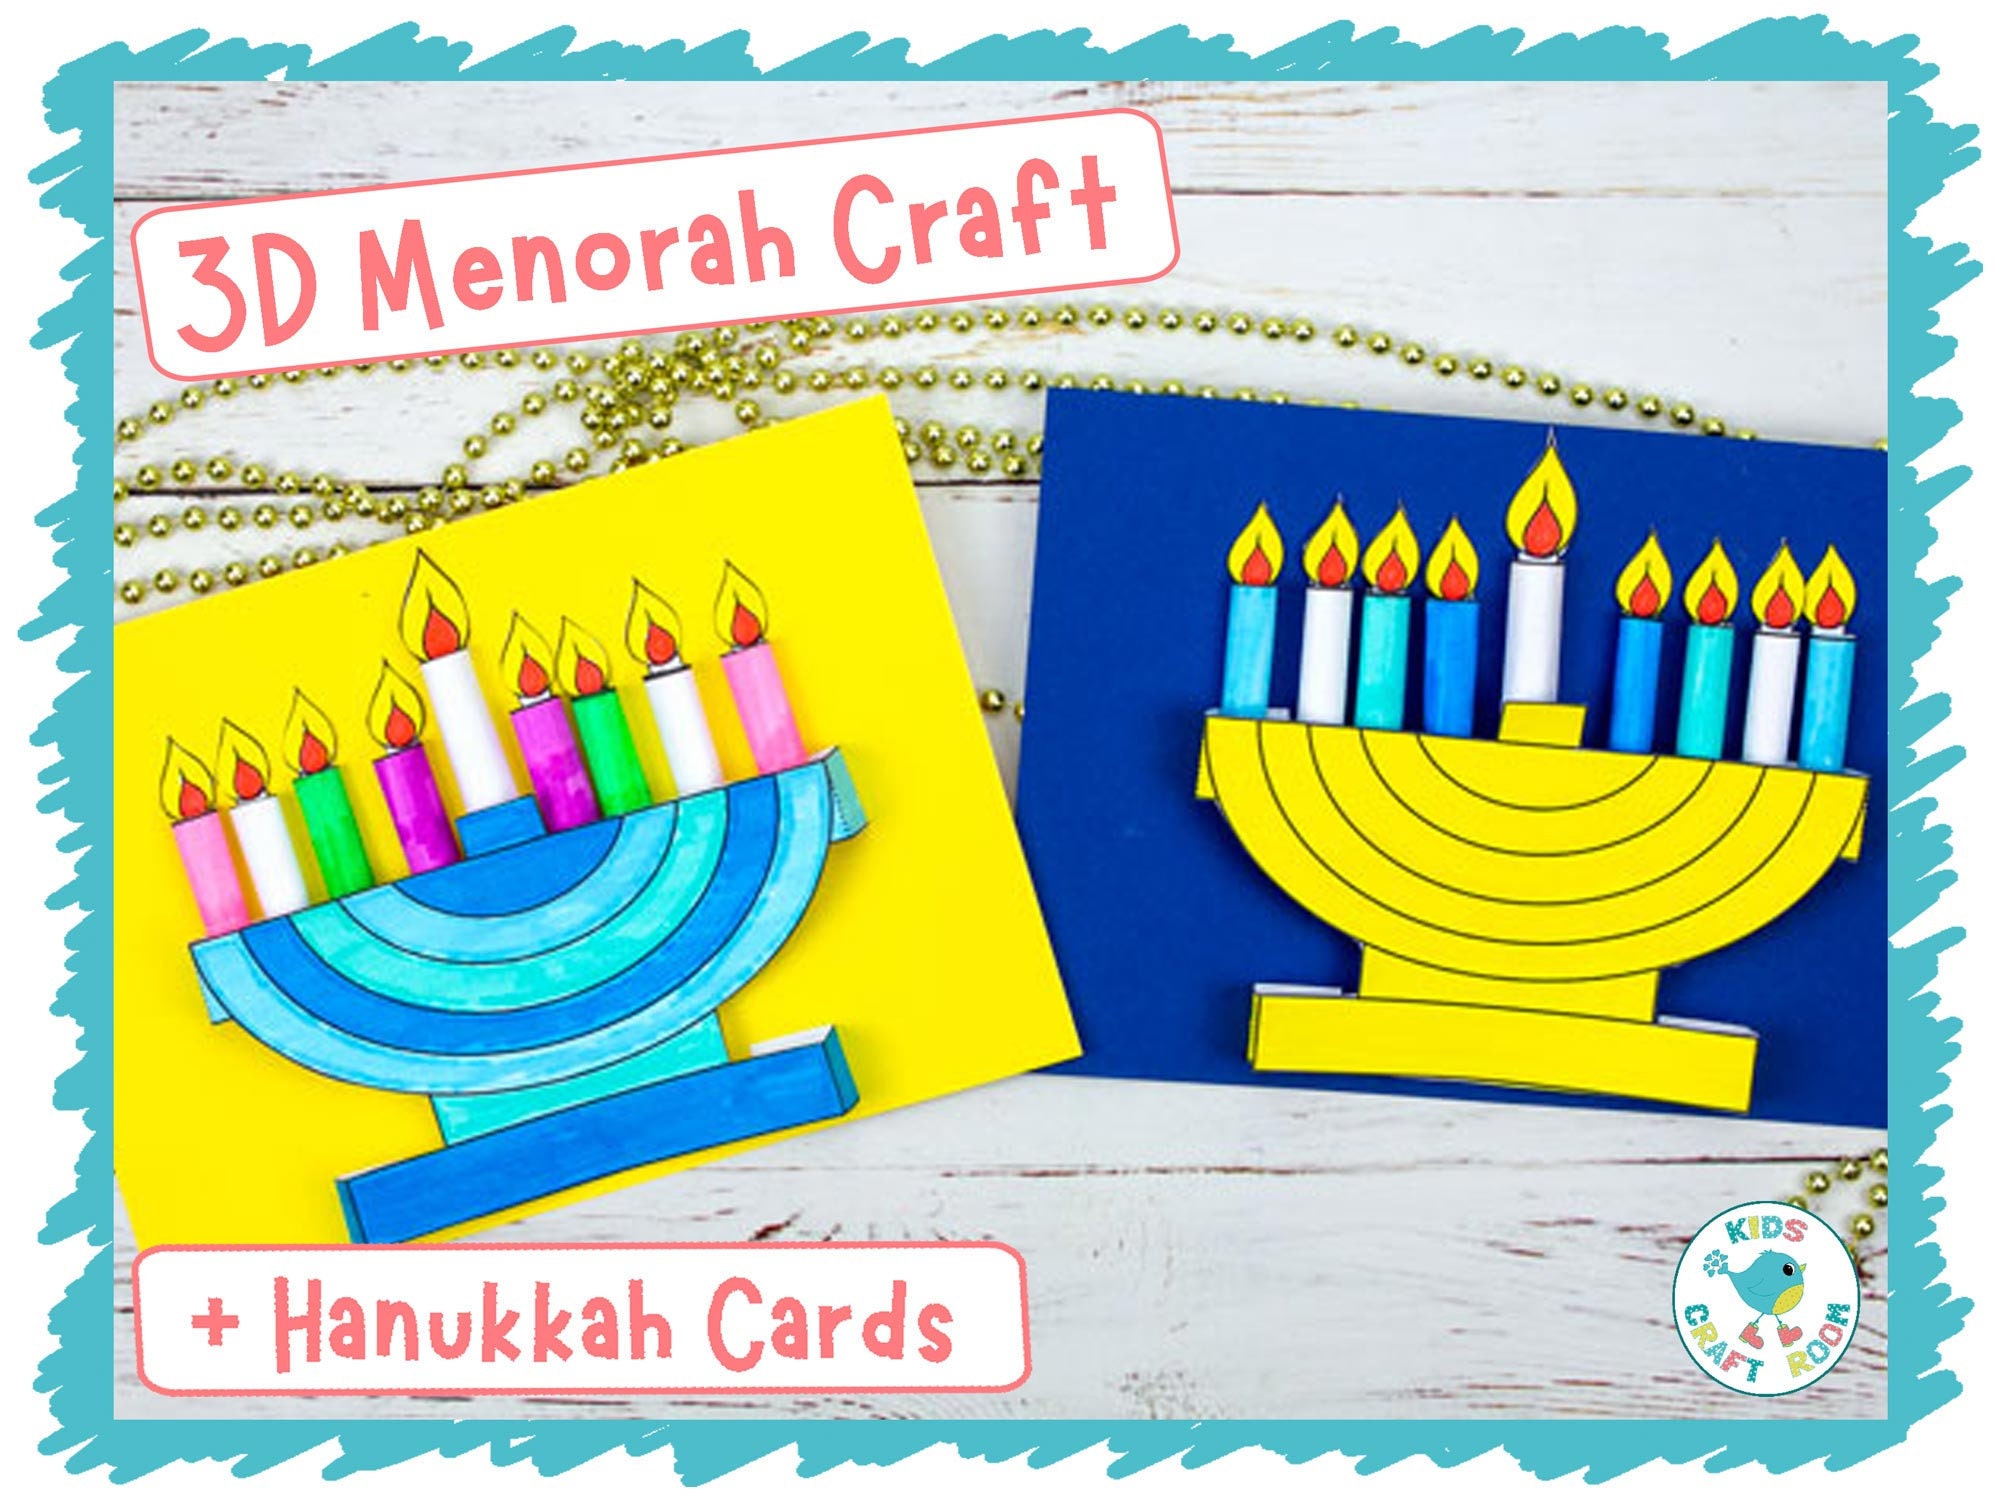 Izzy 'n' Dizzy Chanukah Arts N Crafts Kit for Kids - Create Your Own F